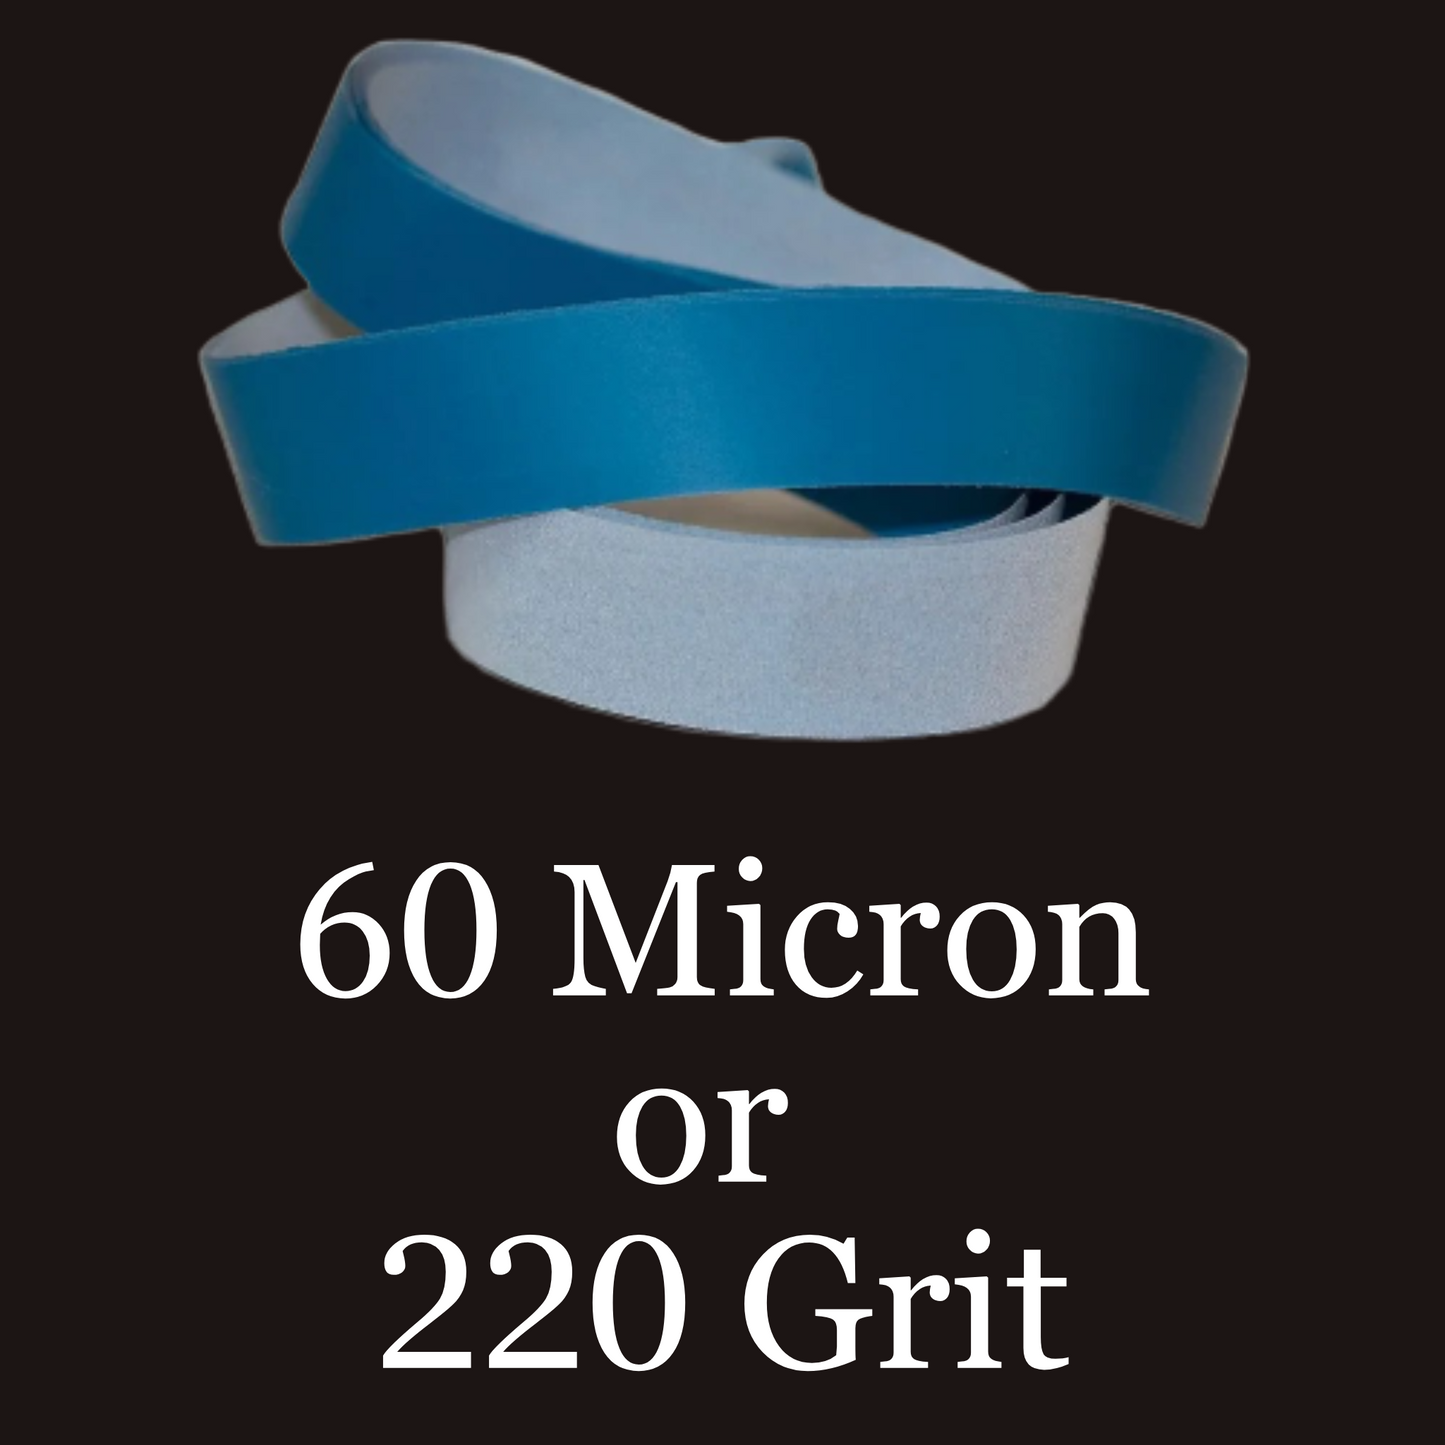 2” x 72” Film Micron Graded Finishing Belts 60 Micron or 220 Grit